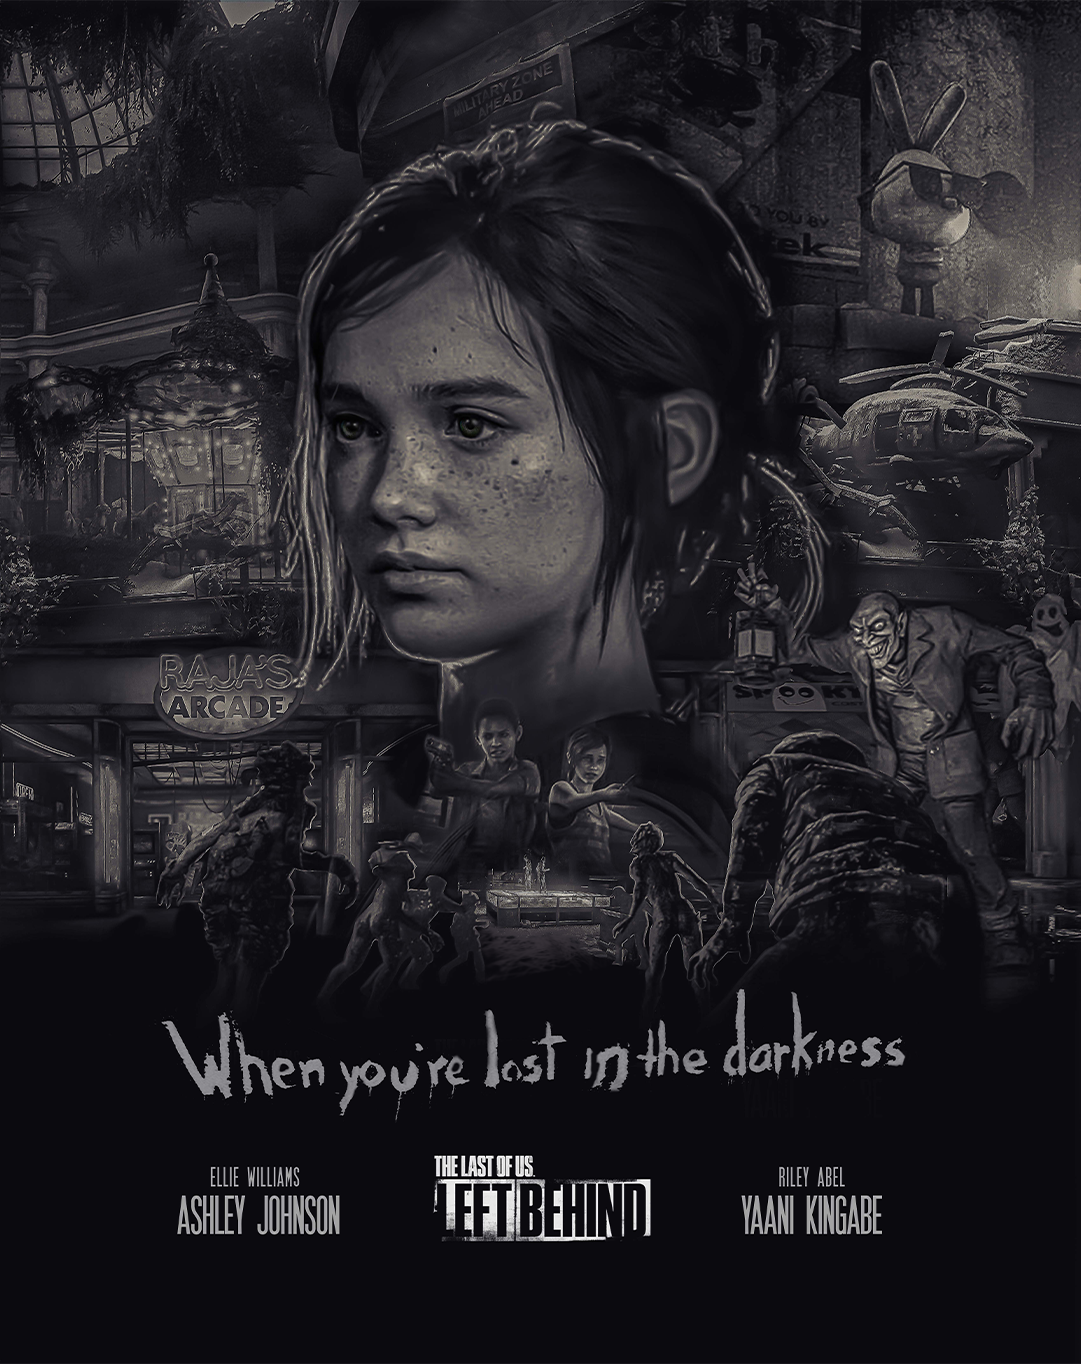 Left Behind – The last of us